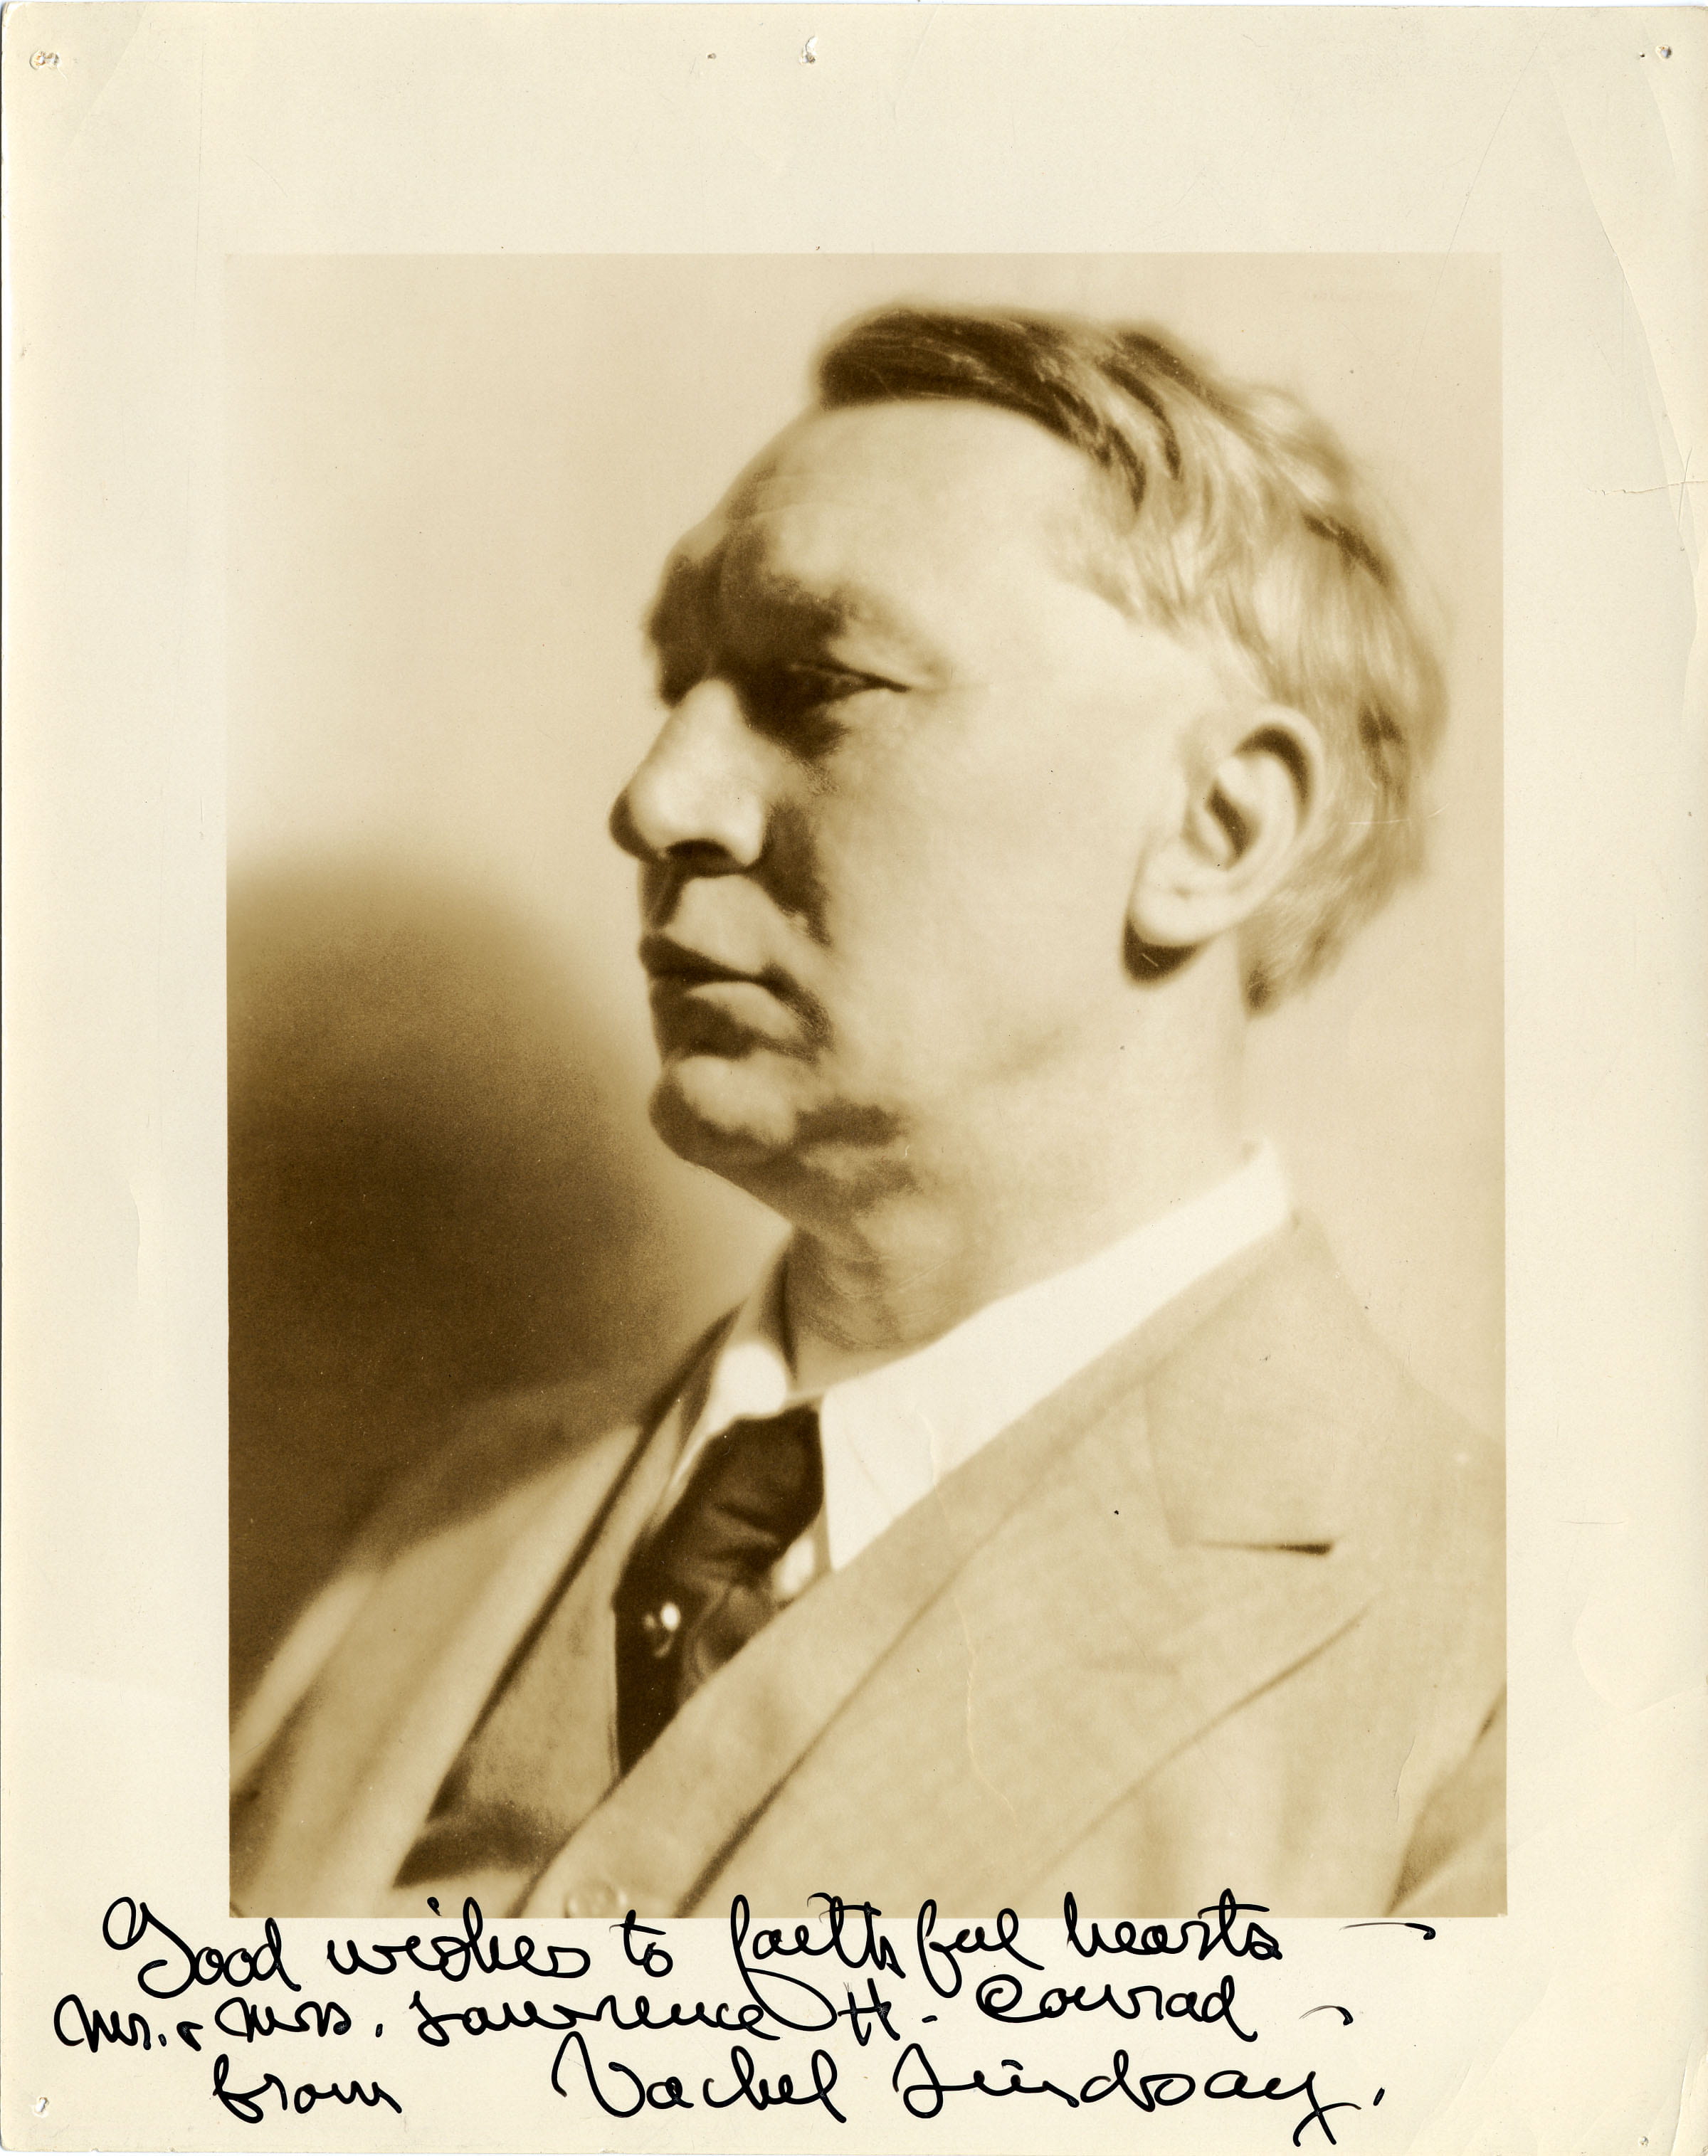 Signed photographic portrait of Vachel Lindsay, from the Lawrence H. Conrad Vachel Lindsay and Robert Frost Collection.